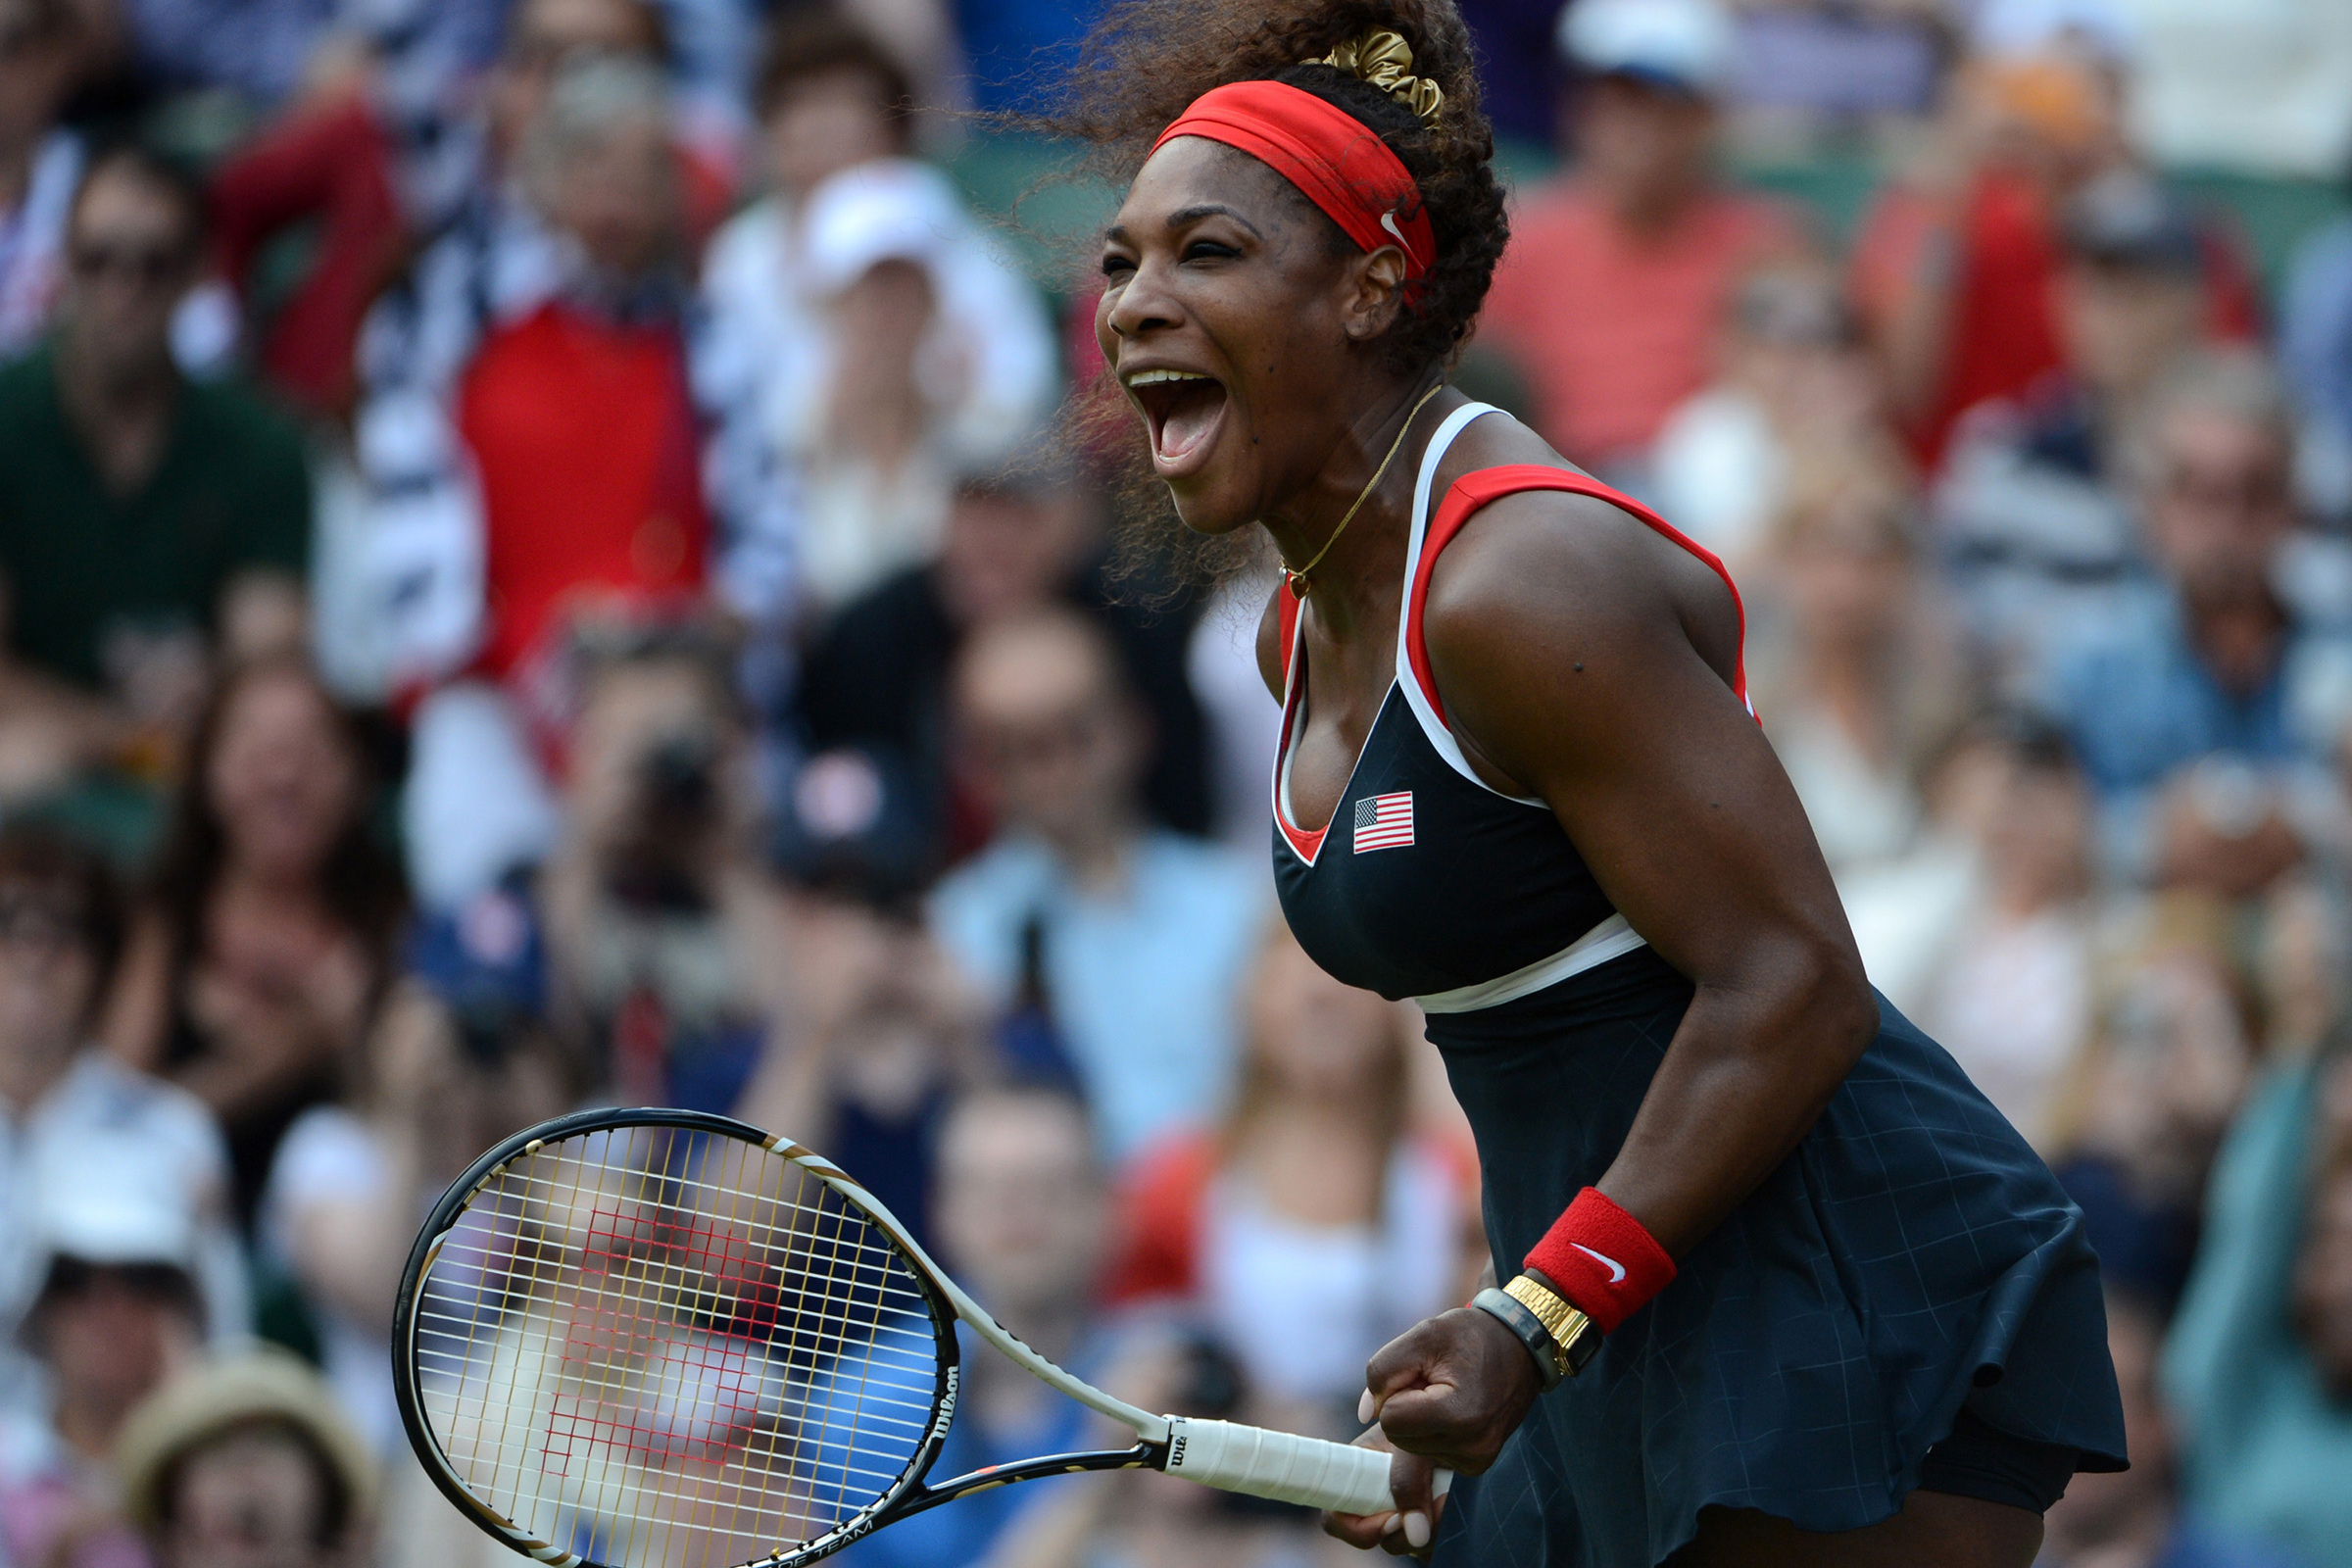 What Serena Williams Gave the World